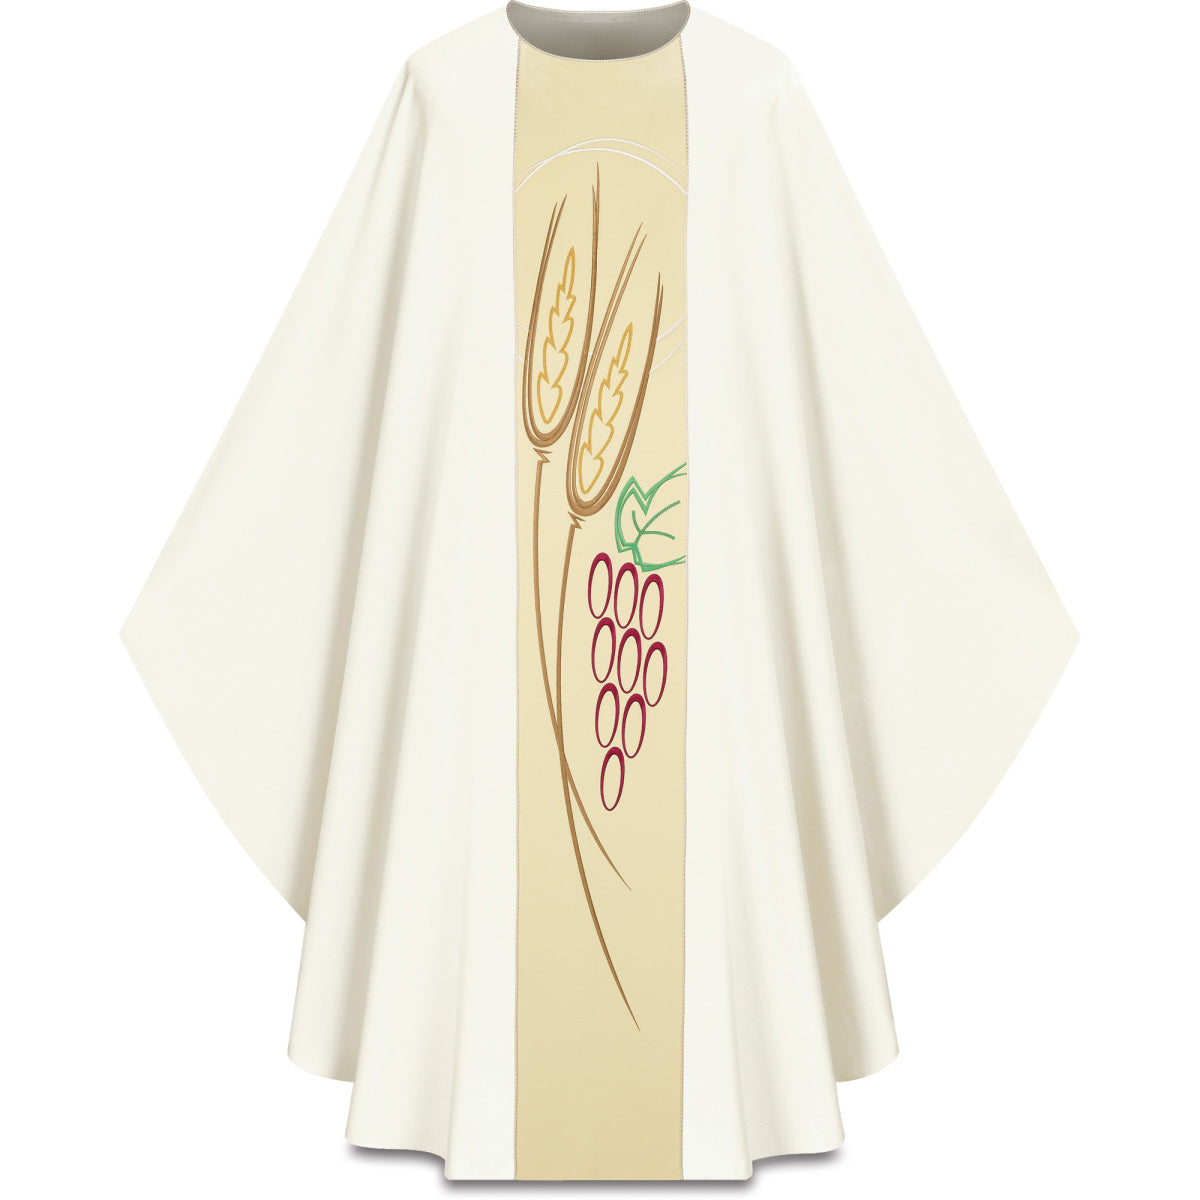 Chasuble with Wheat and Grapes Motif